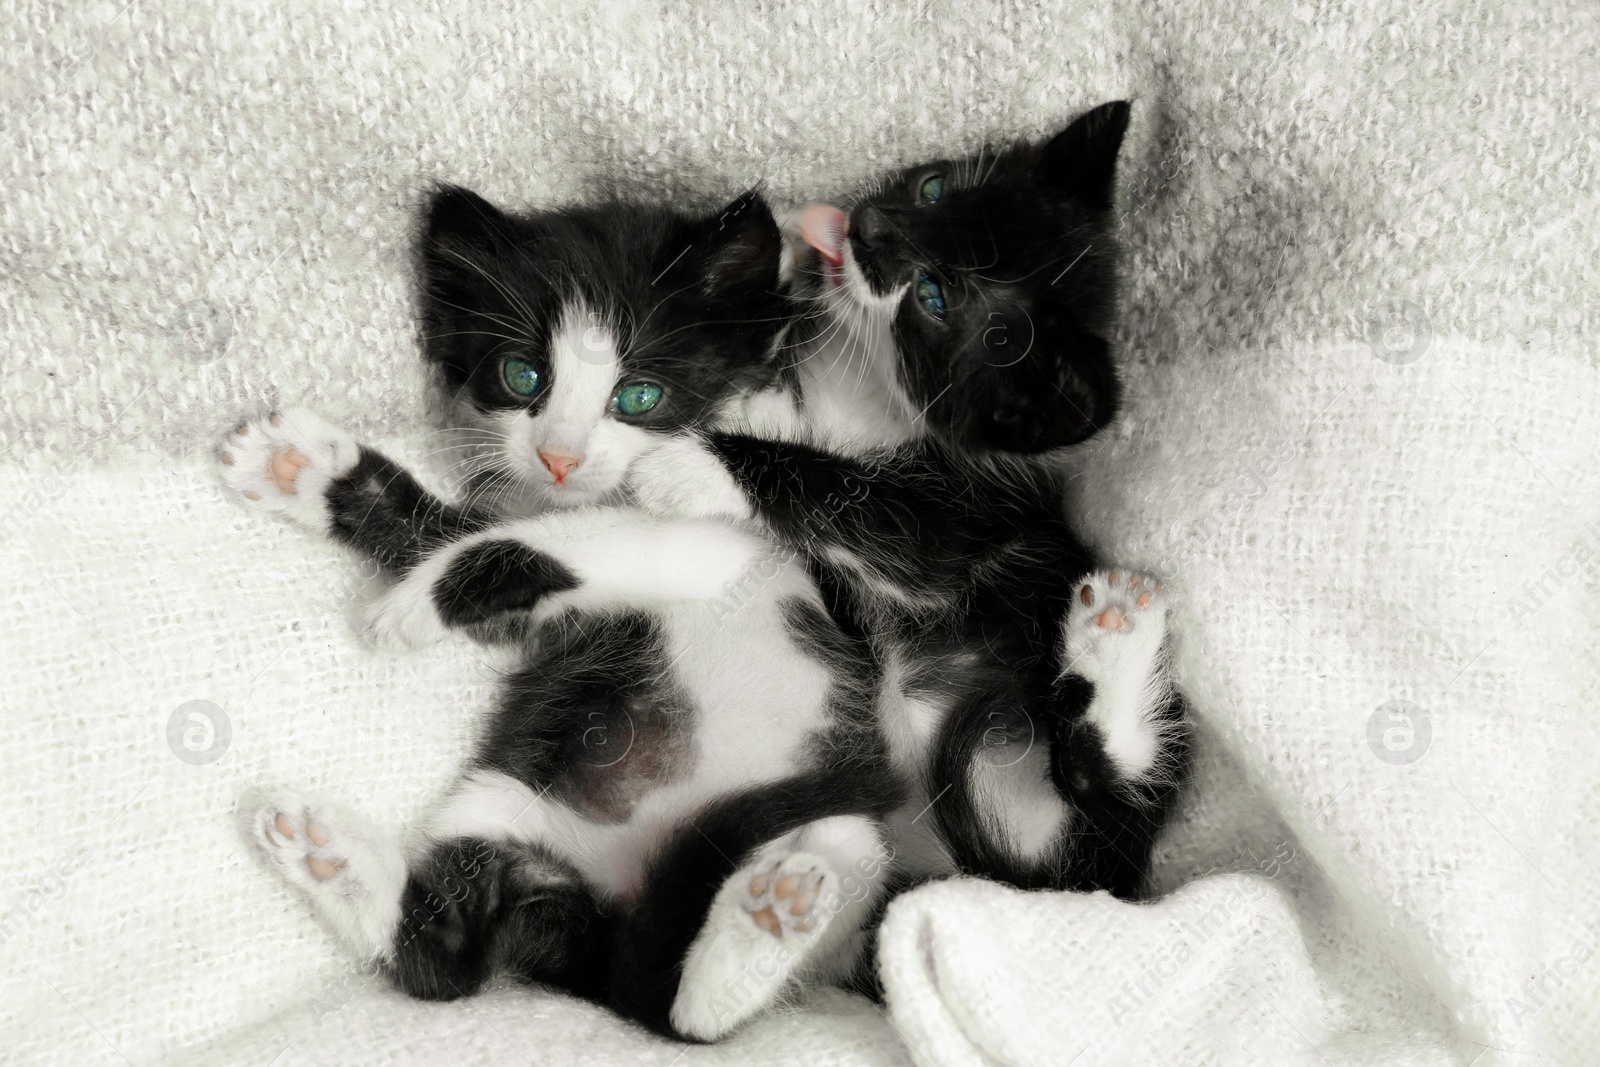 Photo of Cute baby kittens playing on cozy blanket